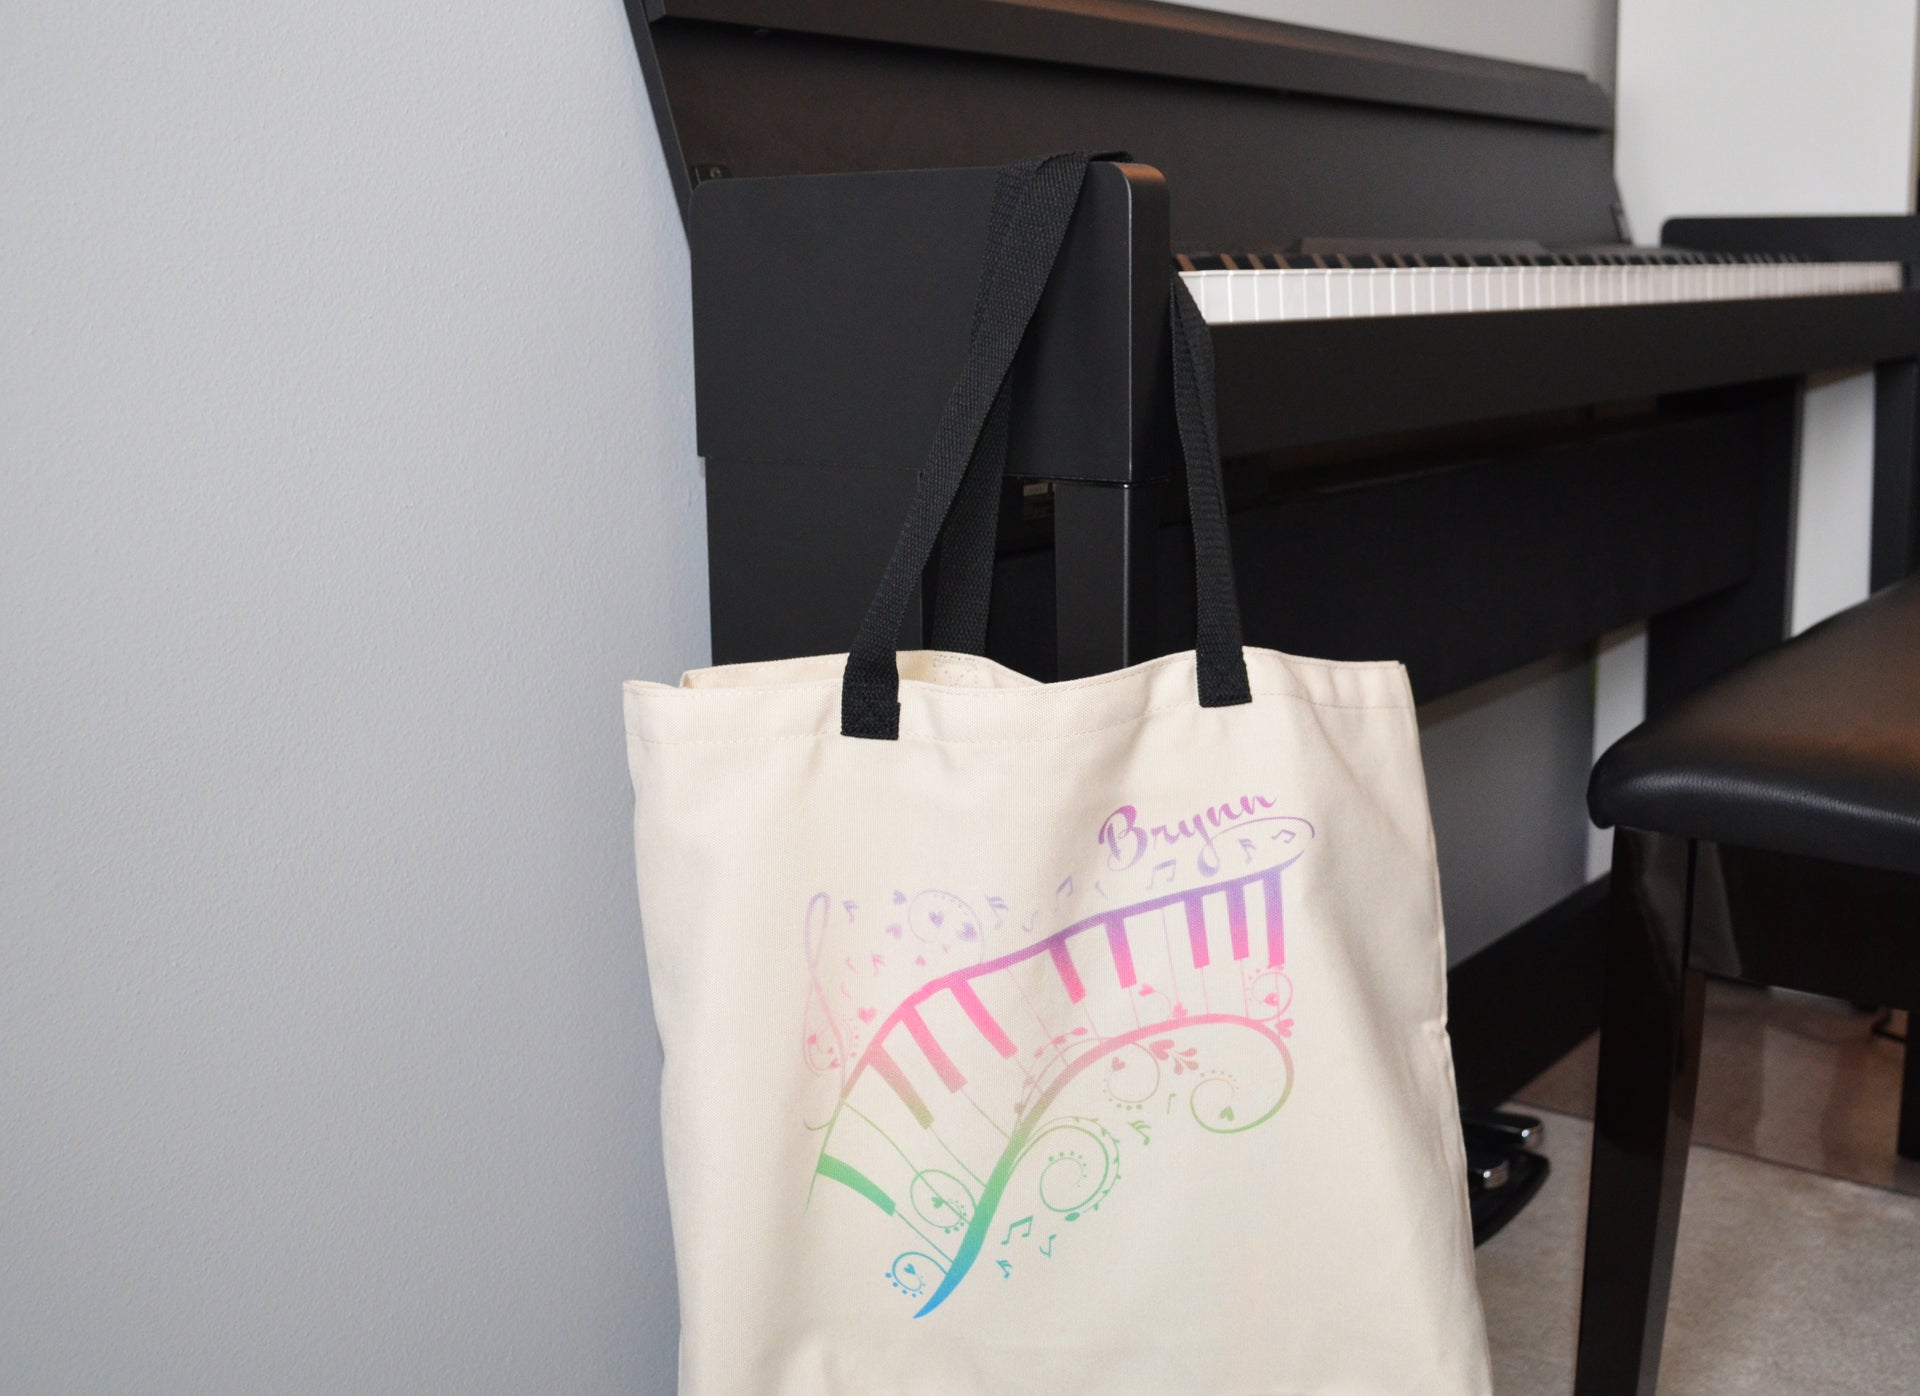 cricut infusible ink tote bag ideas